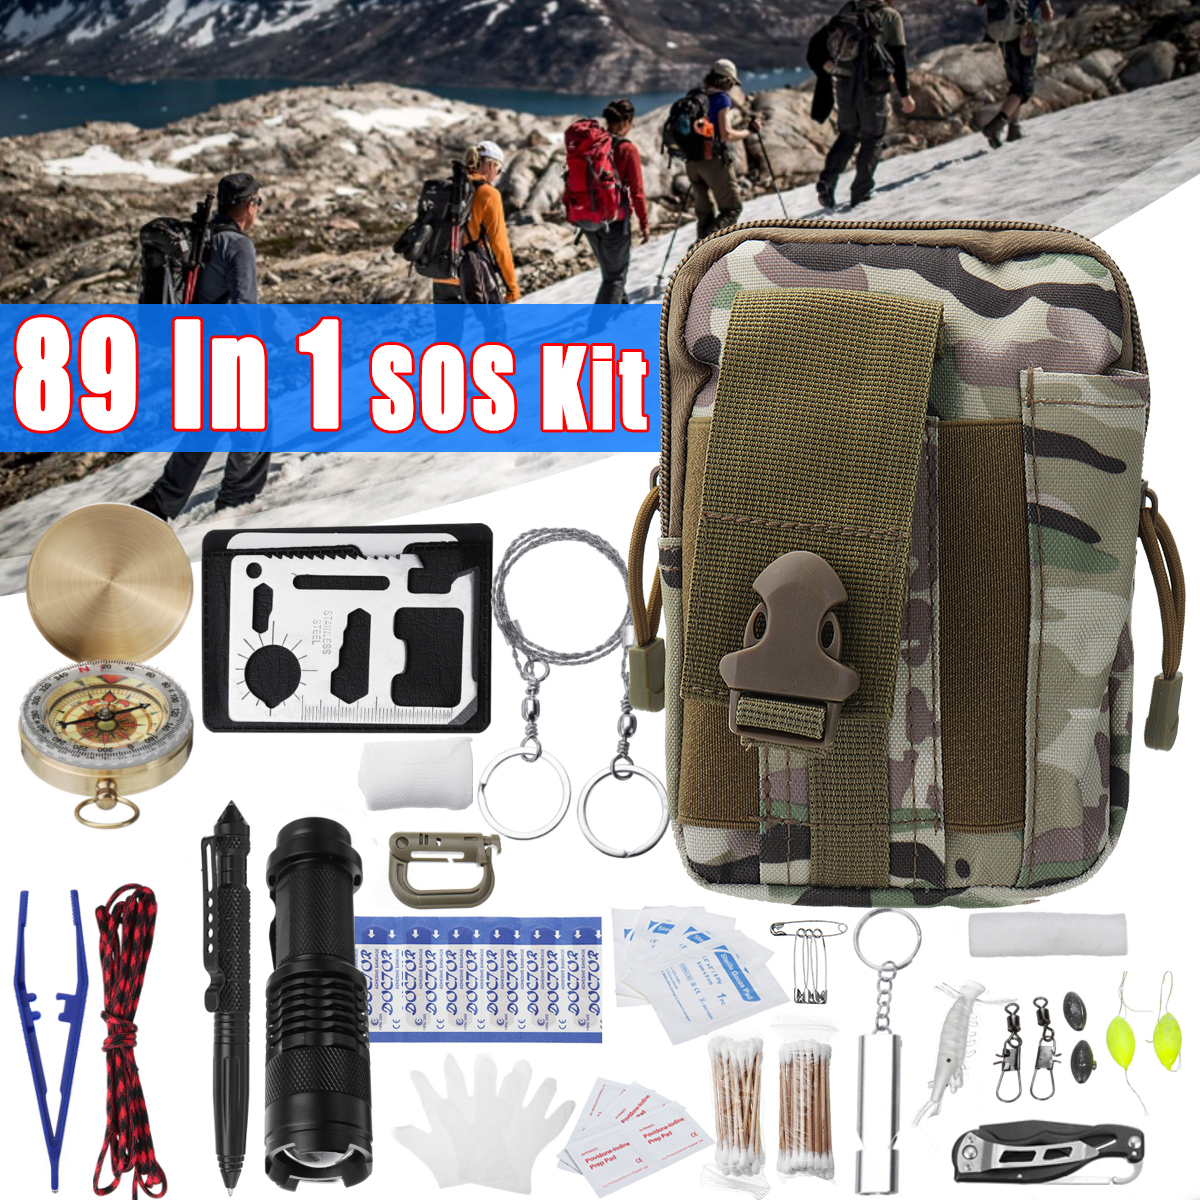 Emergency Survival SOS Kit EDC Tools Gadget Set Camping First Aid Emergency Collection